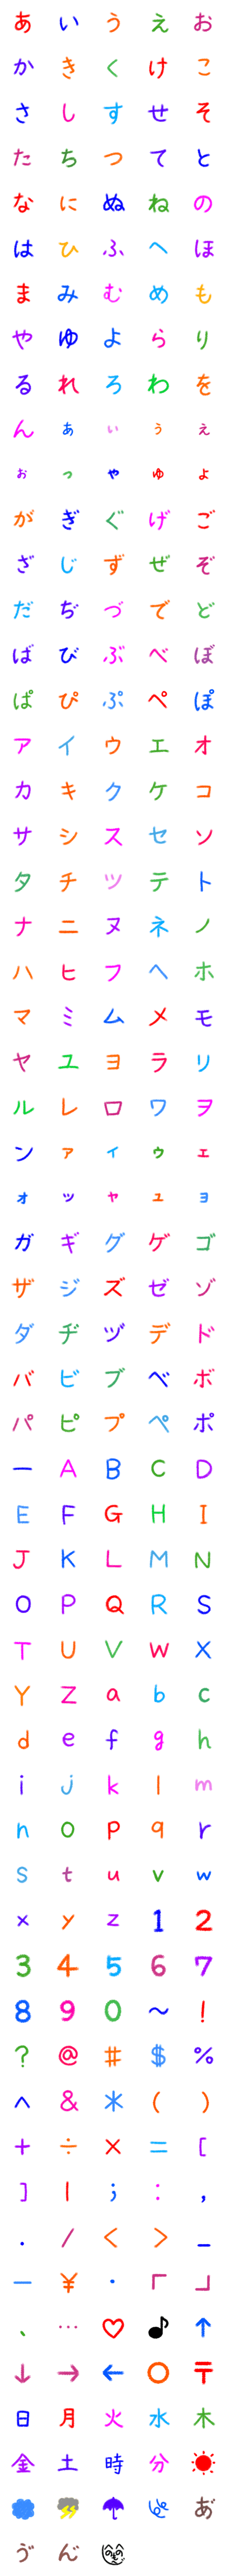 [LINE絵文字]私の文字フォント❤️パステル調の画像一覧